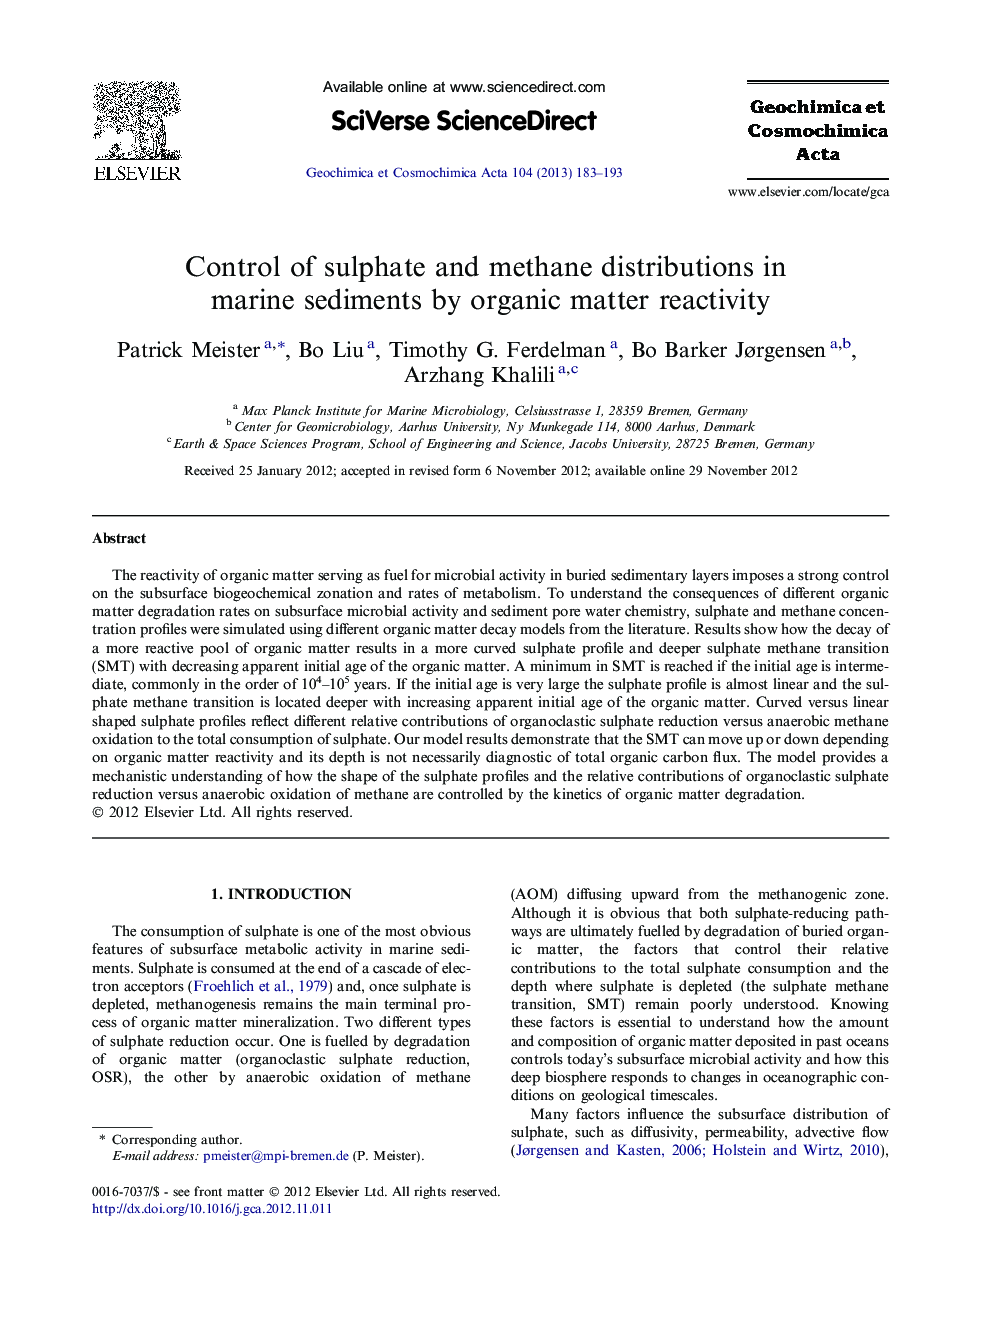 Control of sulphate and methane distributions in marine sediments by organic matter reactivity